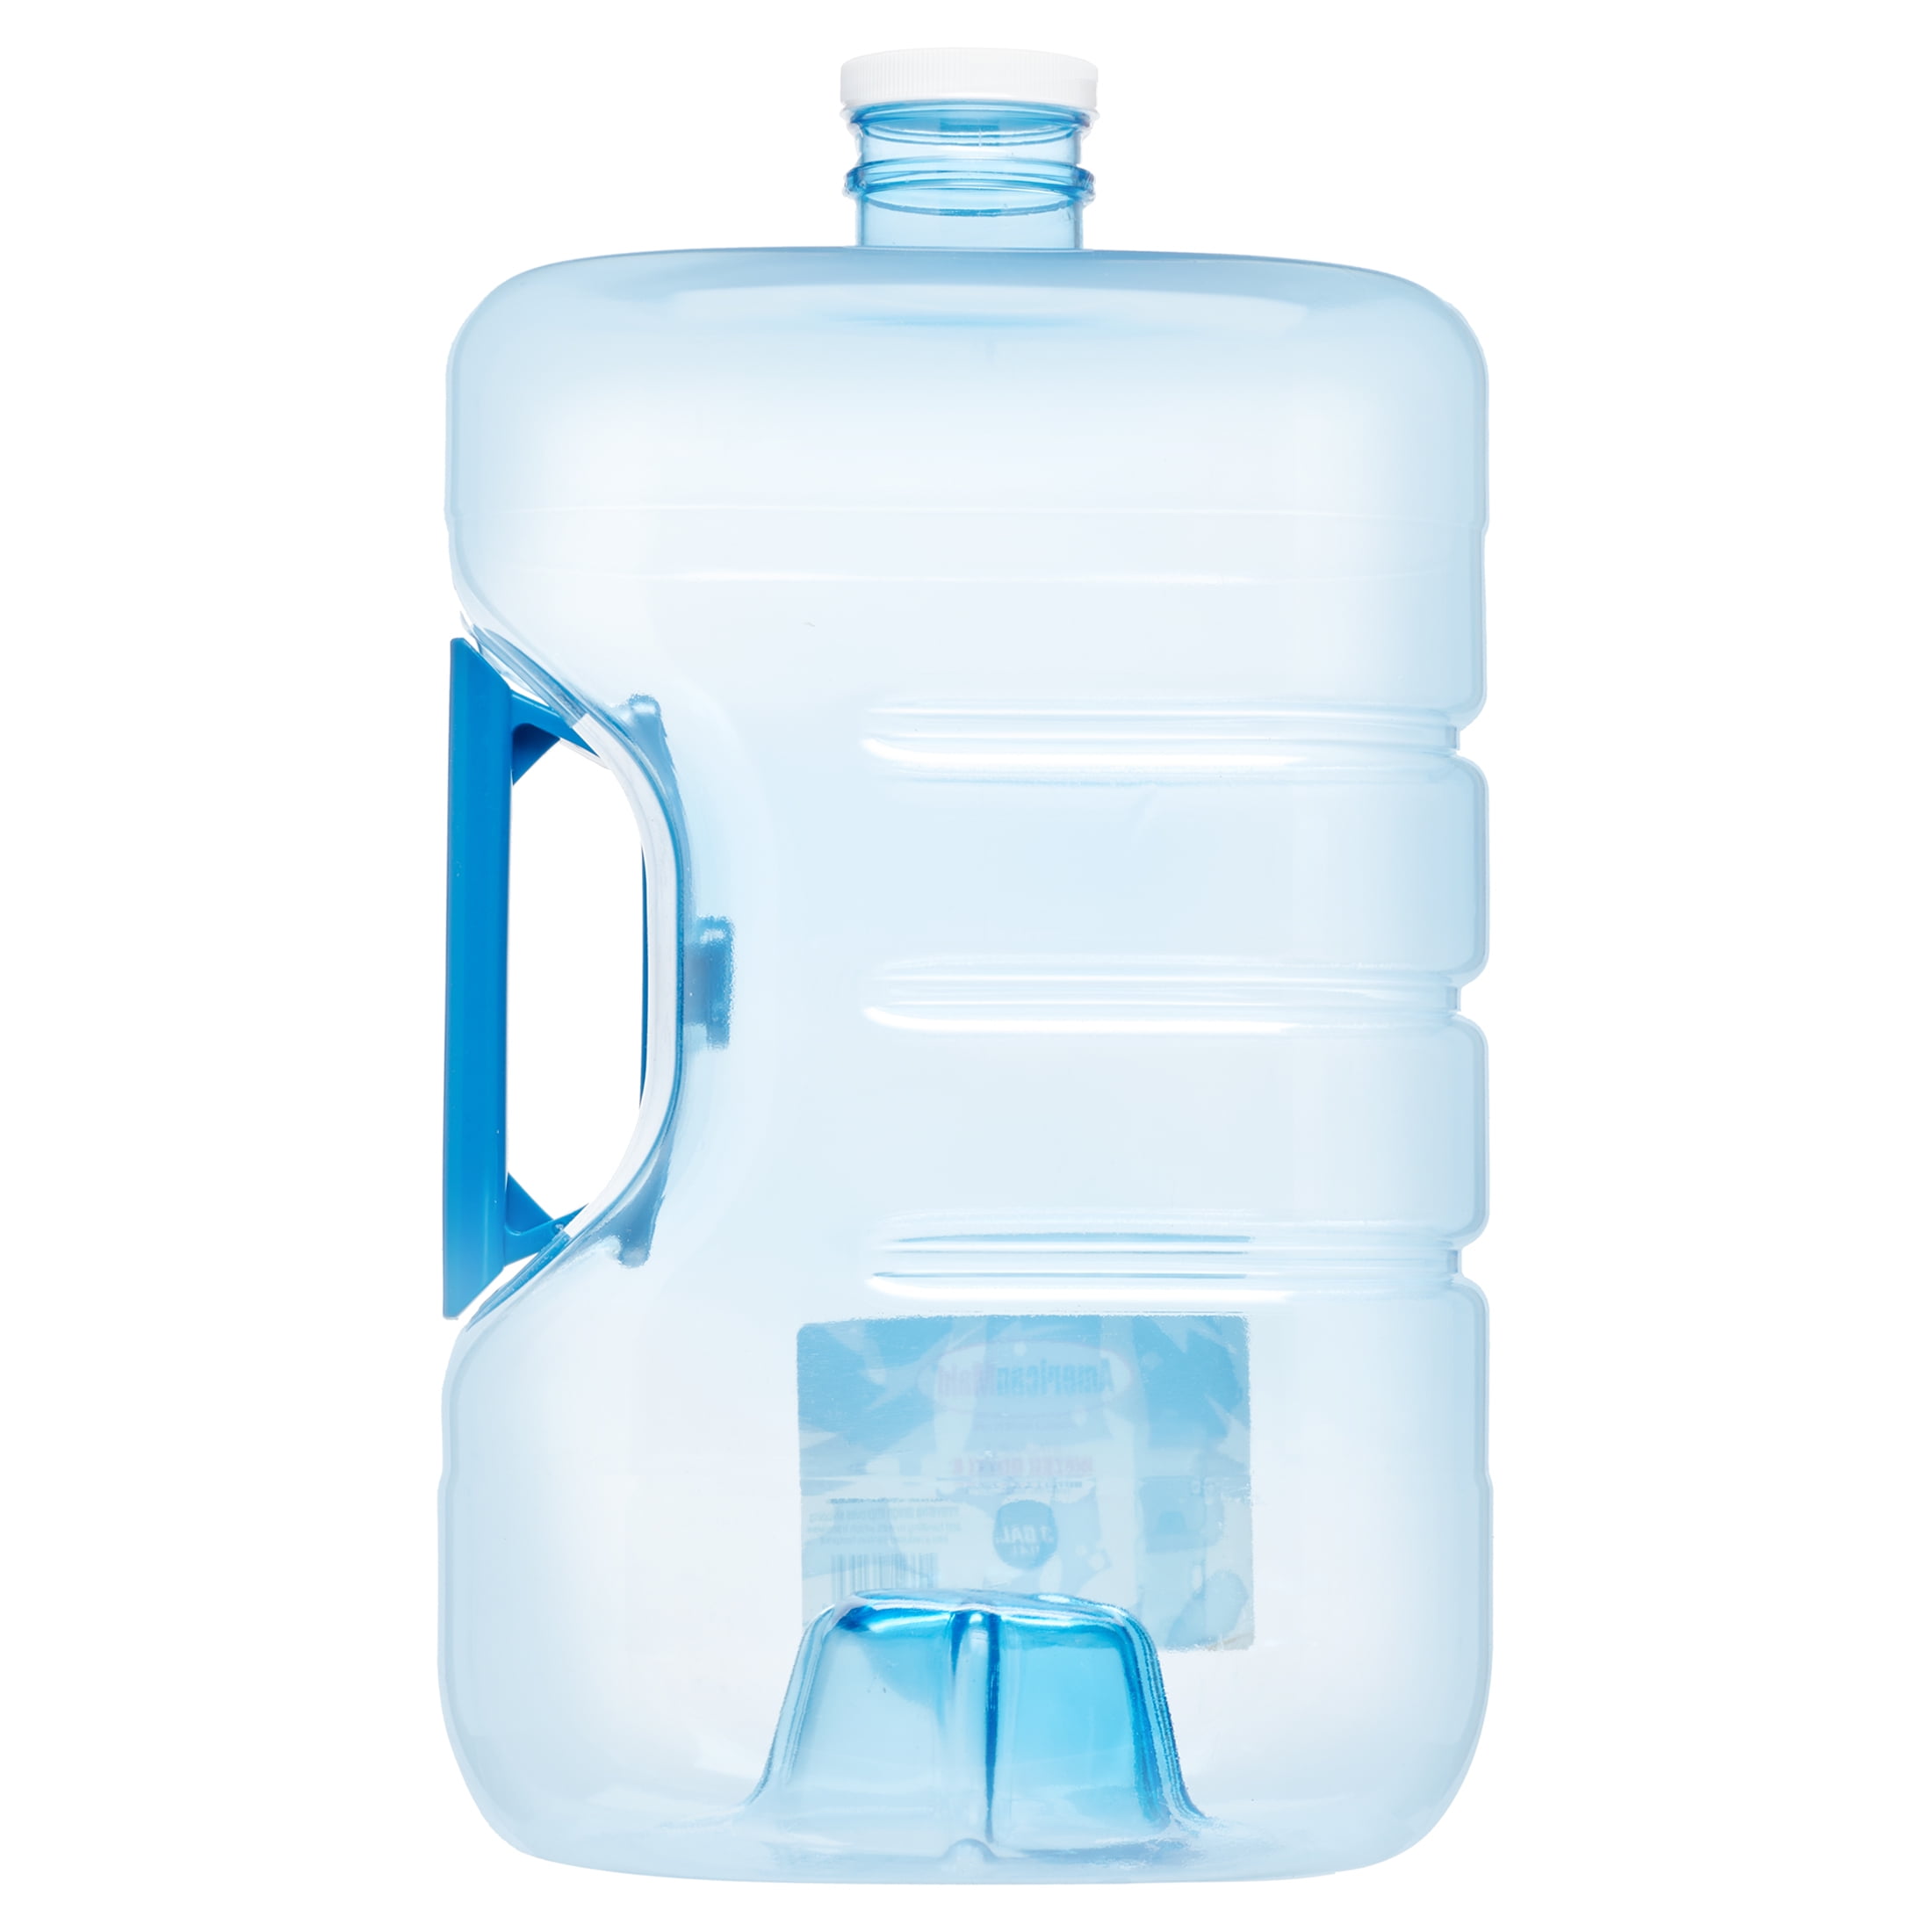 CHAMPS 5 Gallon Jug with Lid and Spout - Aguas Frescas Vitrolero Plastic  Water Container - 5 Gallon Drink Dispenser - Large Beverage Dispenser Ideal